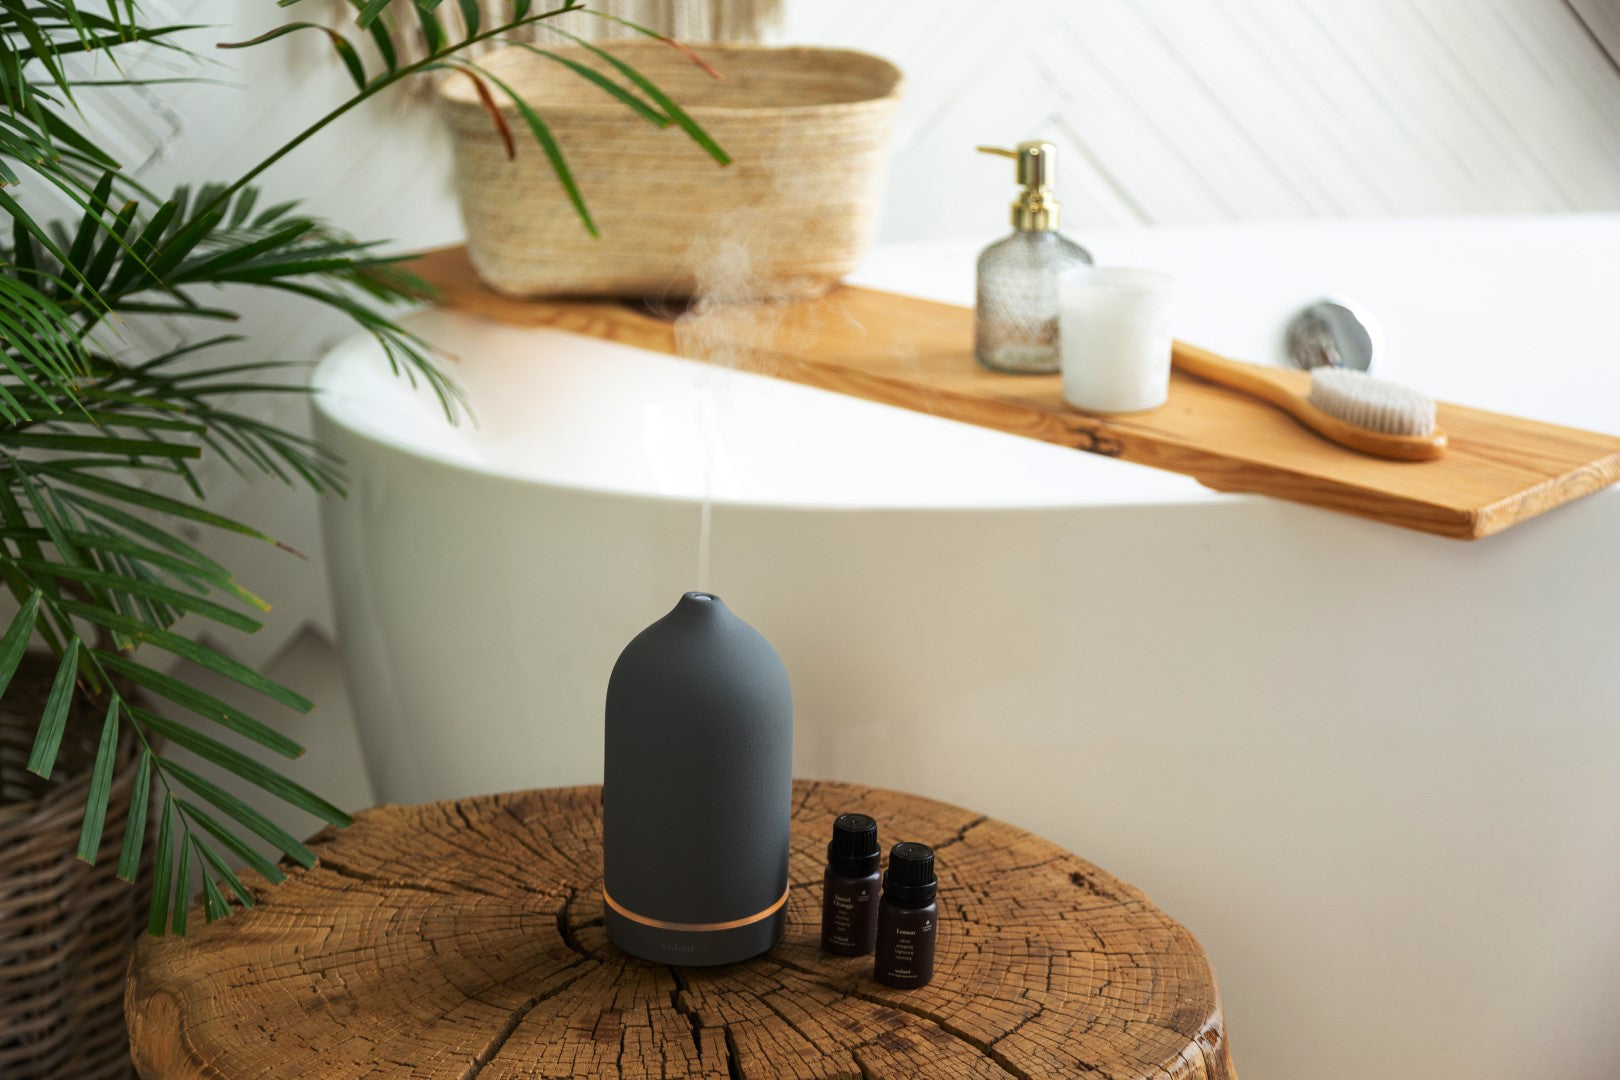 Oil Diffusers Make Your House Smell Great, but Are They Safe?